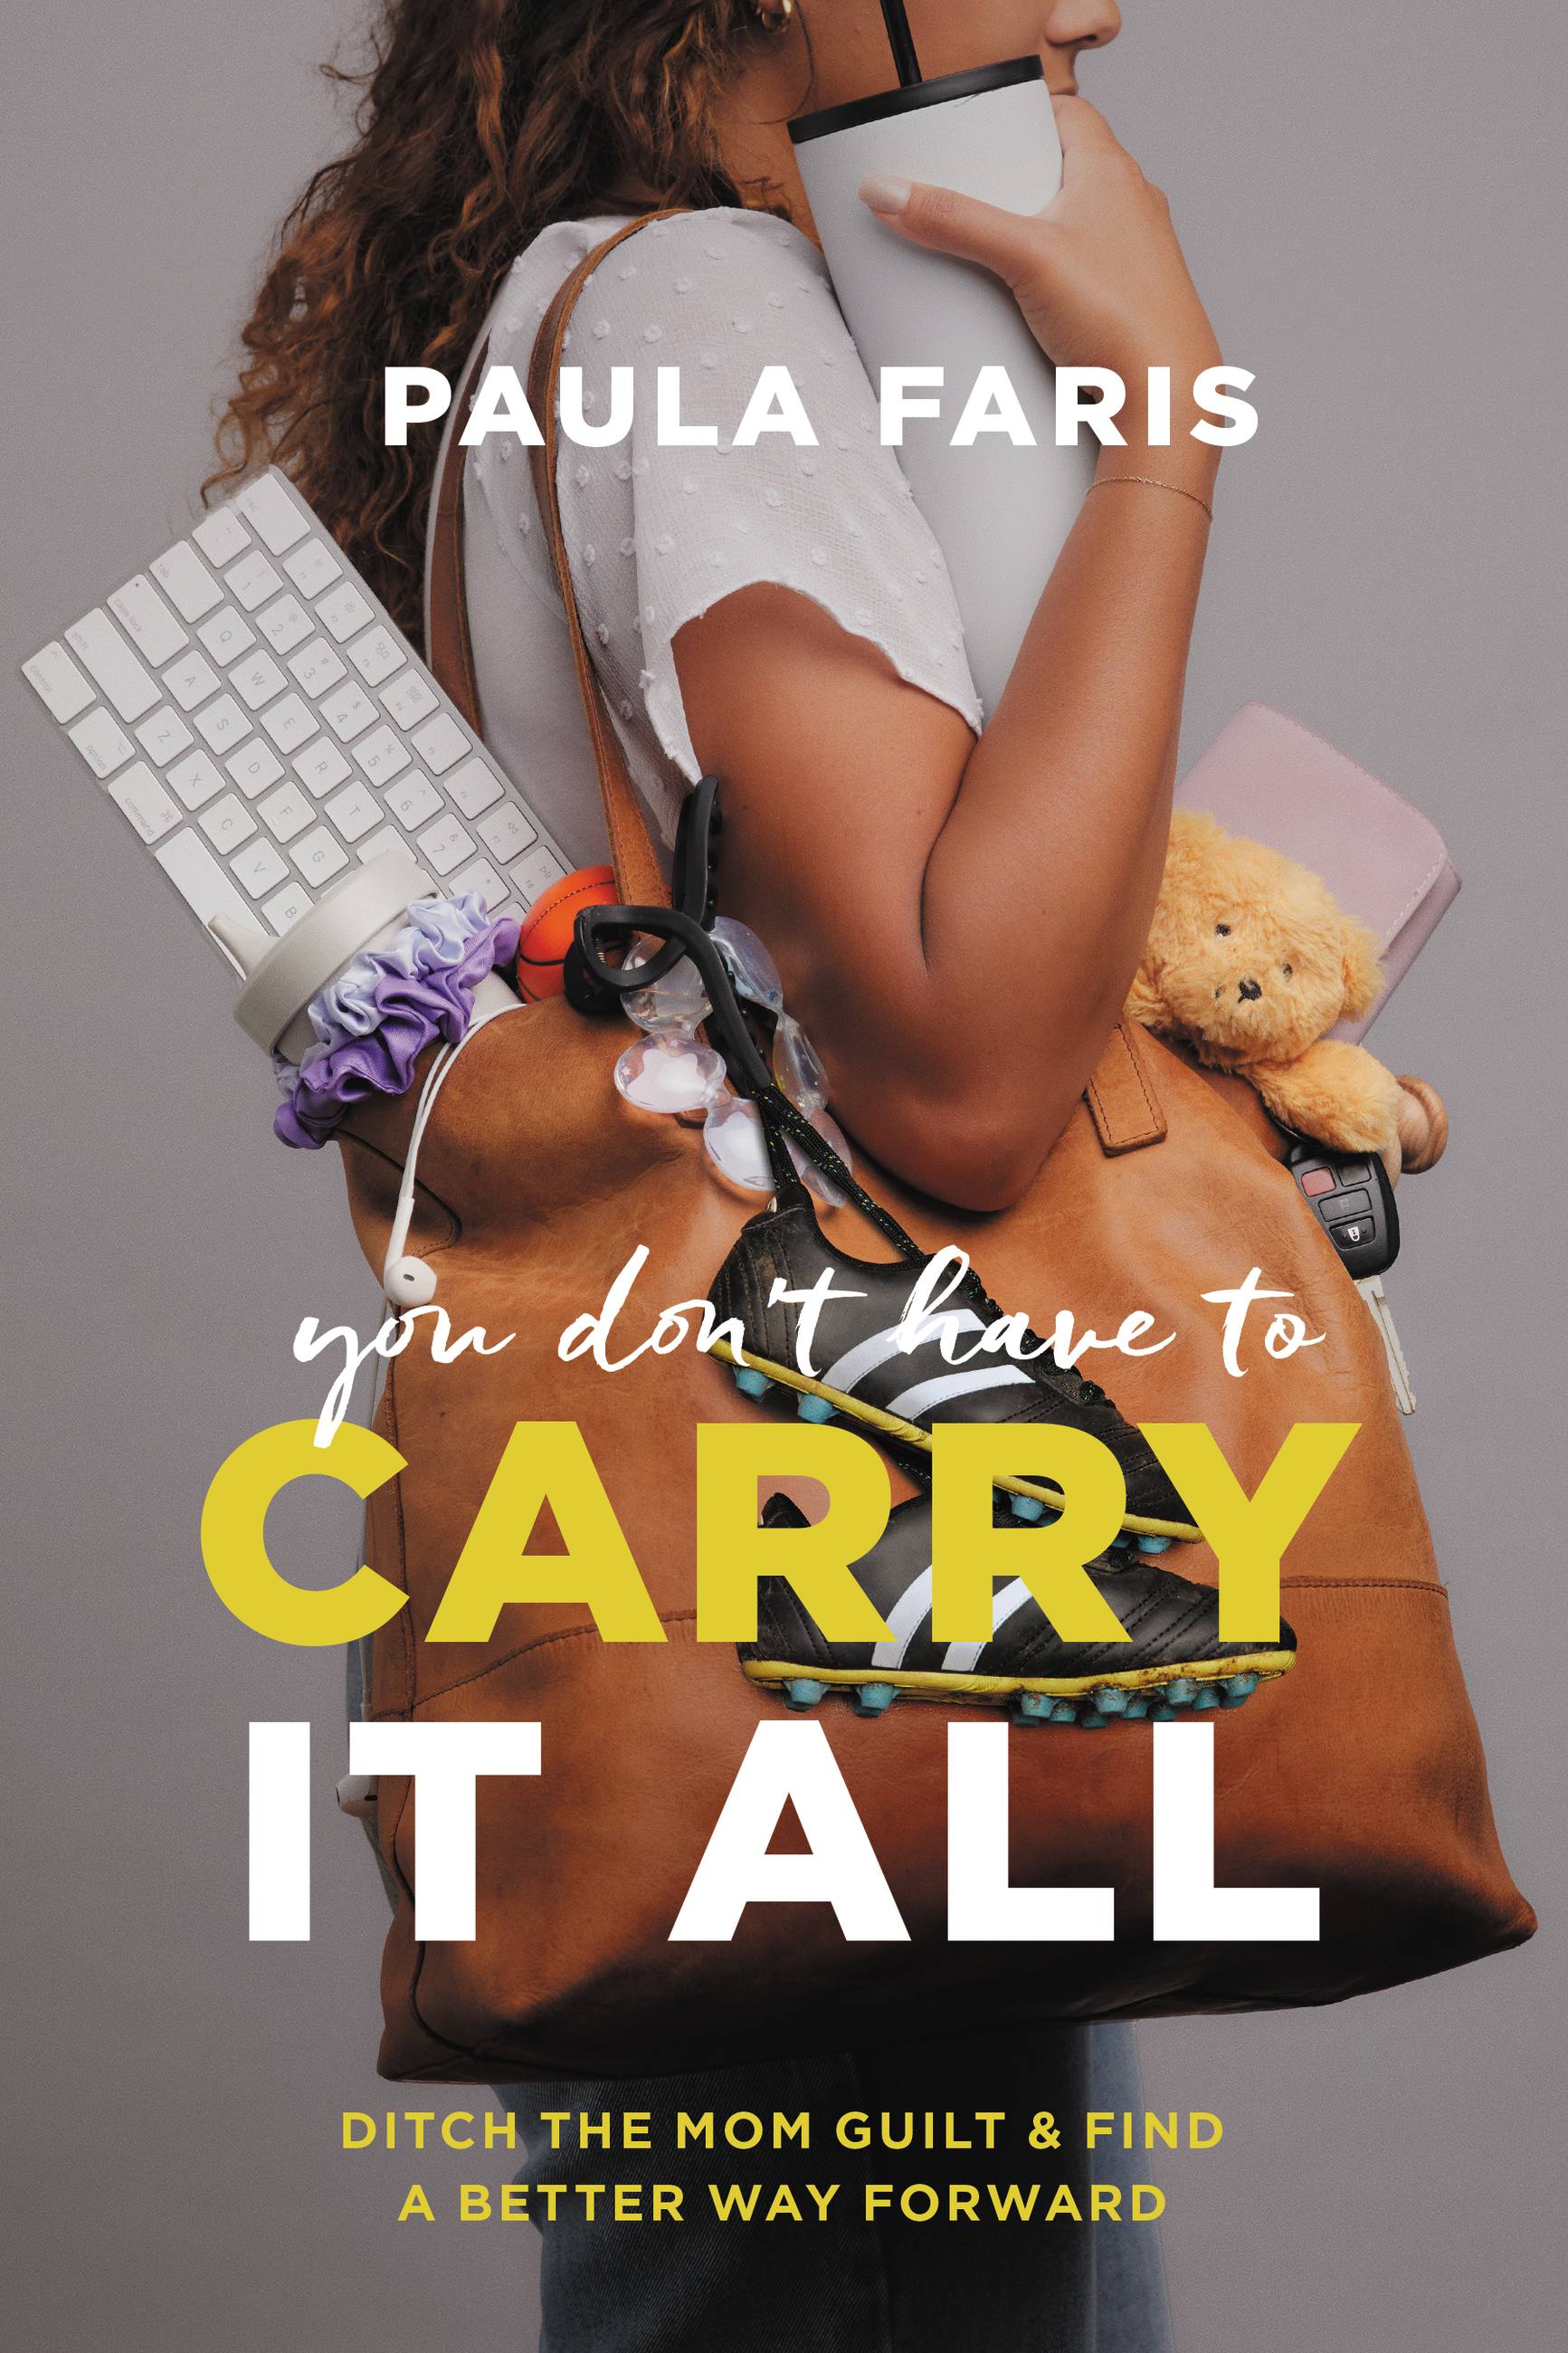 Carry　Faris　Hachette　Have　by　All　to　It　Paula　You　Group　Don't　Book